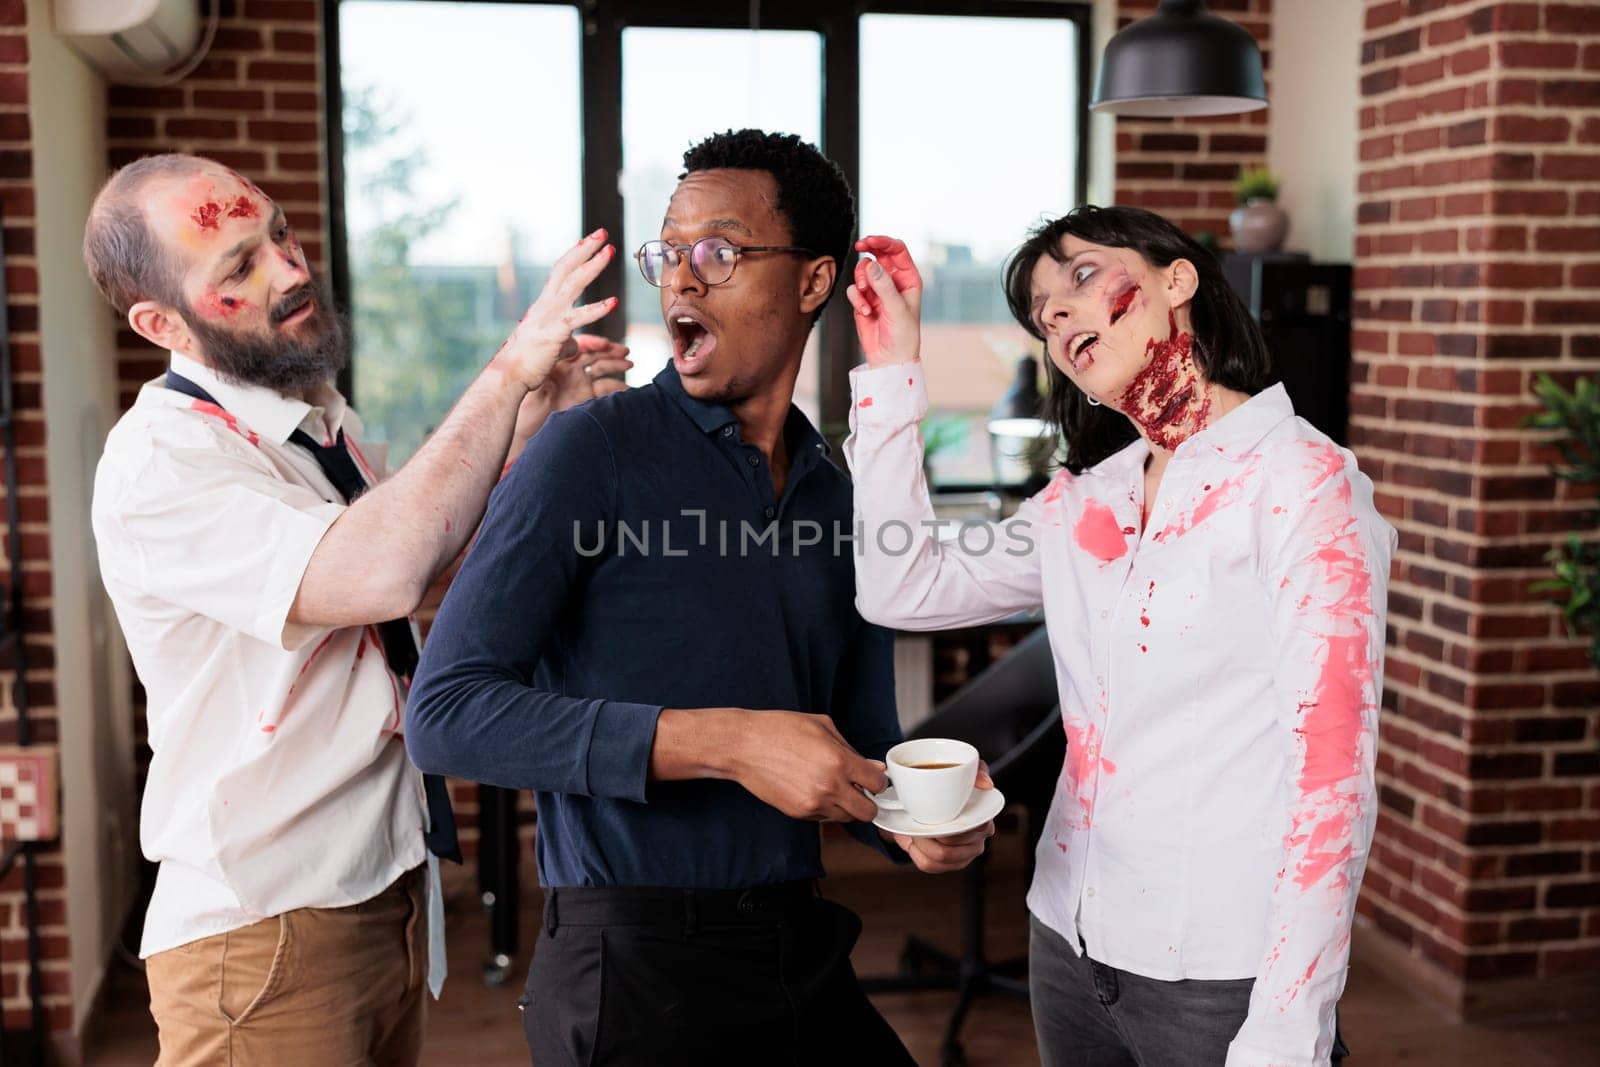 Team leader and workers dressed as zombies having fun during Halloween by DCStudio